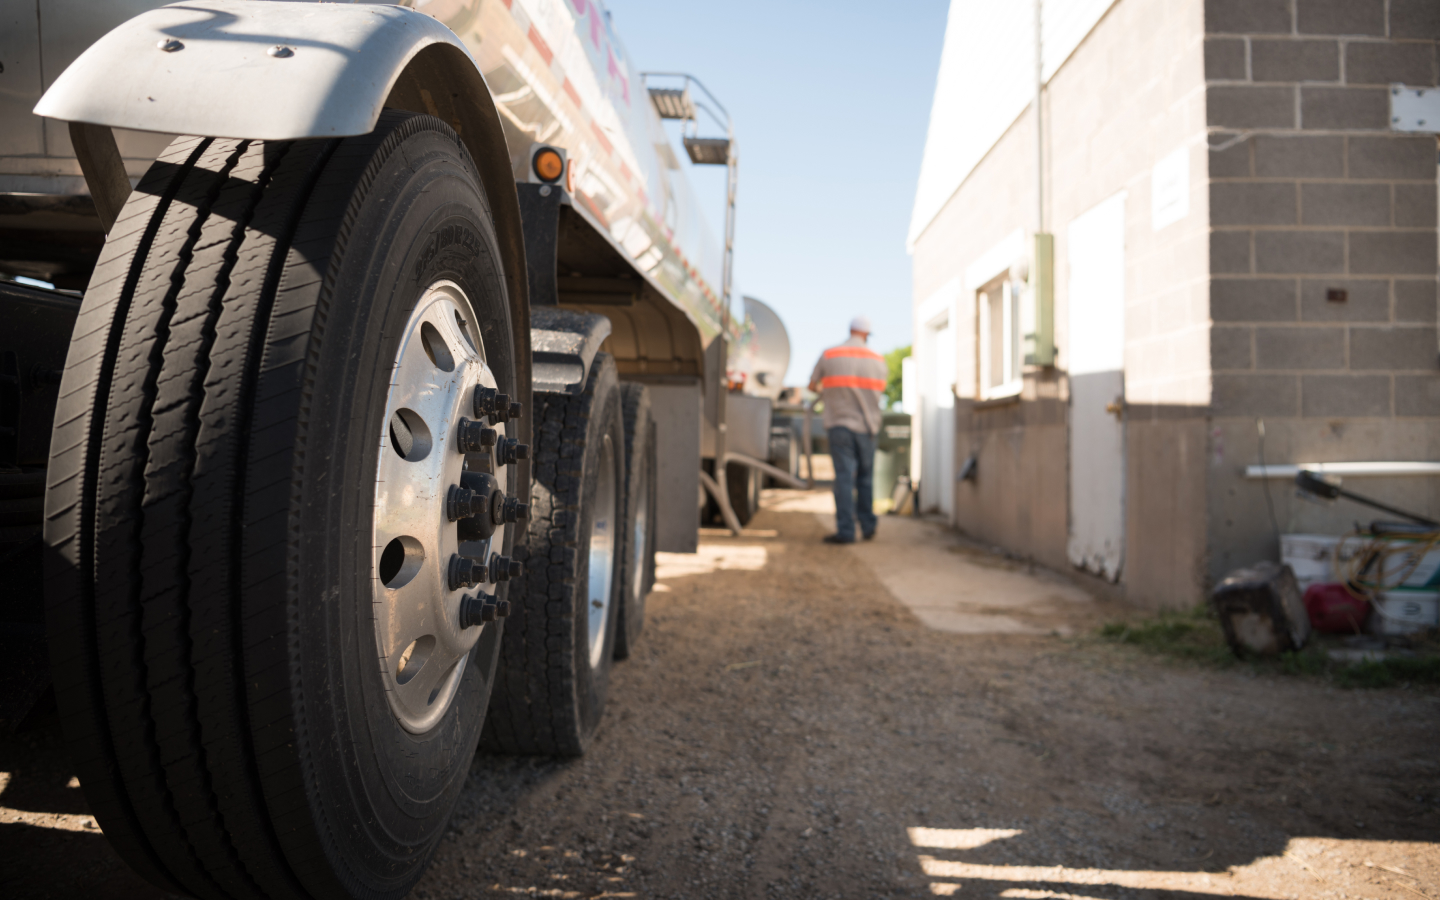 Do low rolling resistance tires save money? | Motive (formerly KeepTruckin)